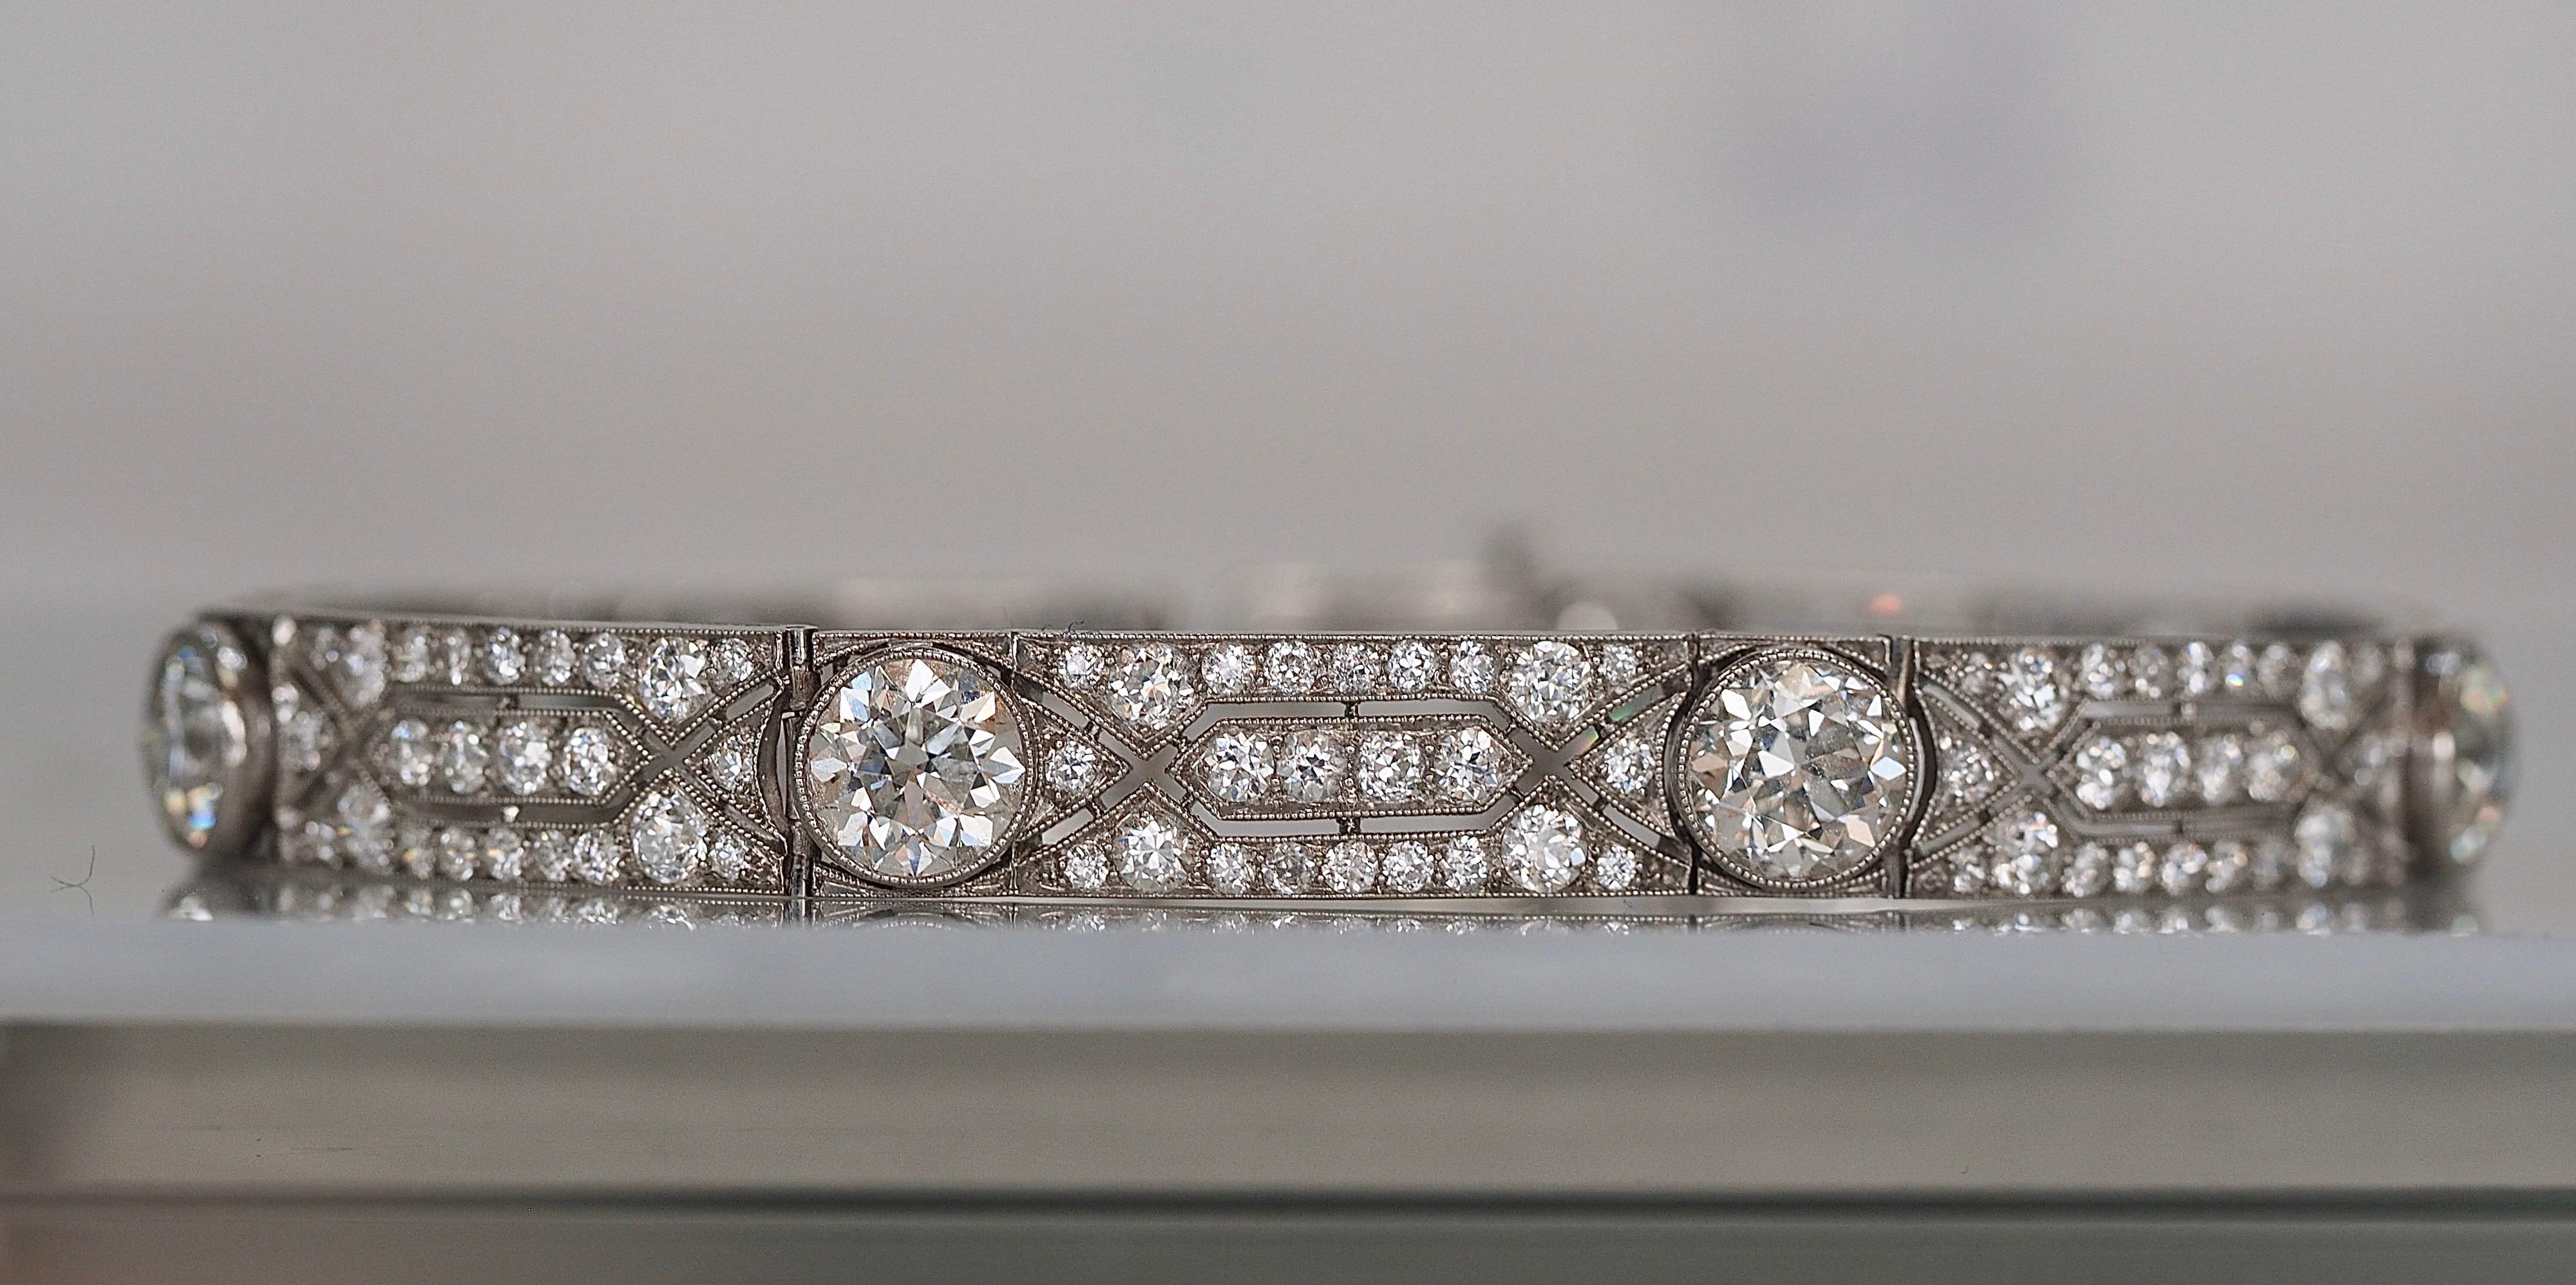 This platinum Vintage Tiffany & CO bracelet from 1995 is absolutely remarkable. There are seven old edwardian cut diamonds ranging from 0.95- 1.00 carat each with a total carat weight of 6.81 CTW, bezel set surrounded with a beautiful touch of